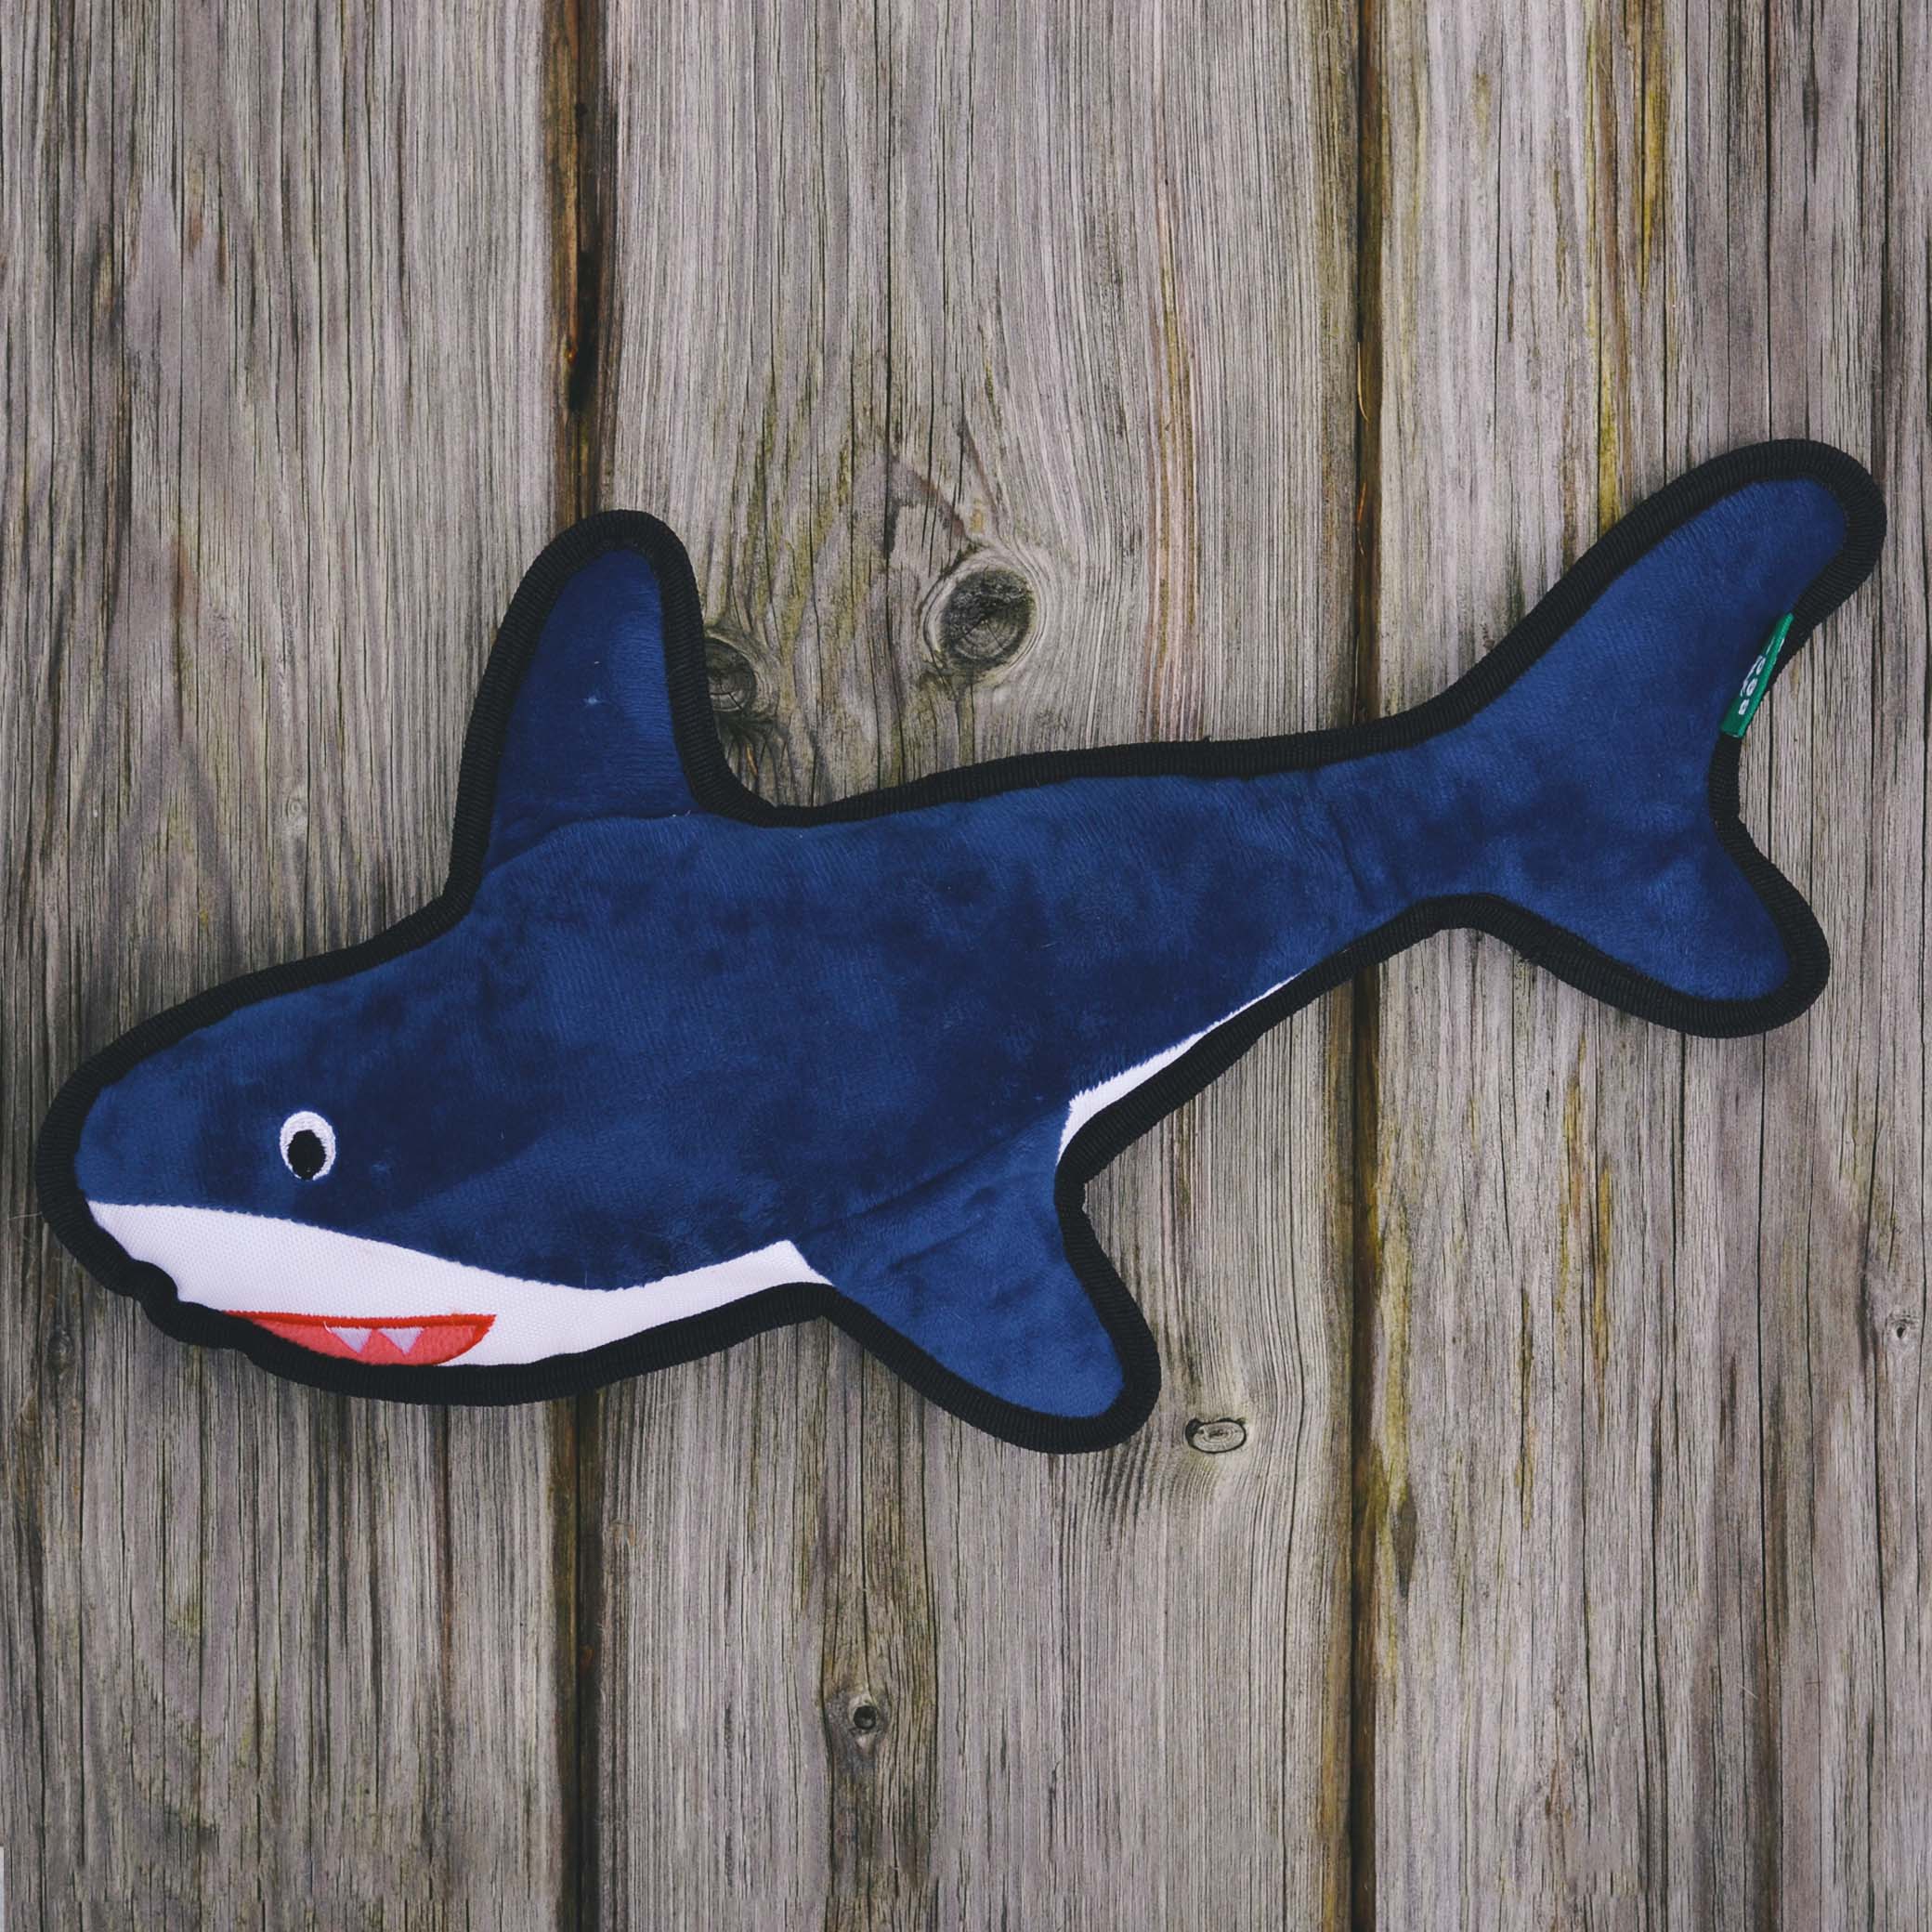 Rough & Tough Recycled Plastic Shark Dog Toy (7461399396594)